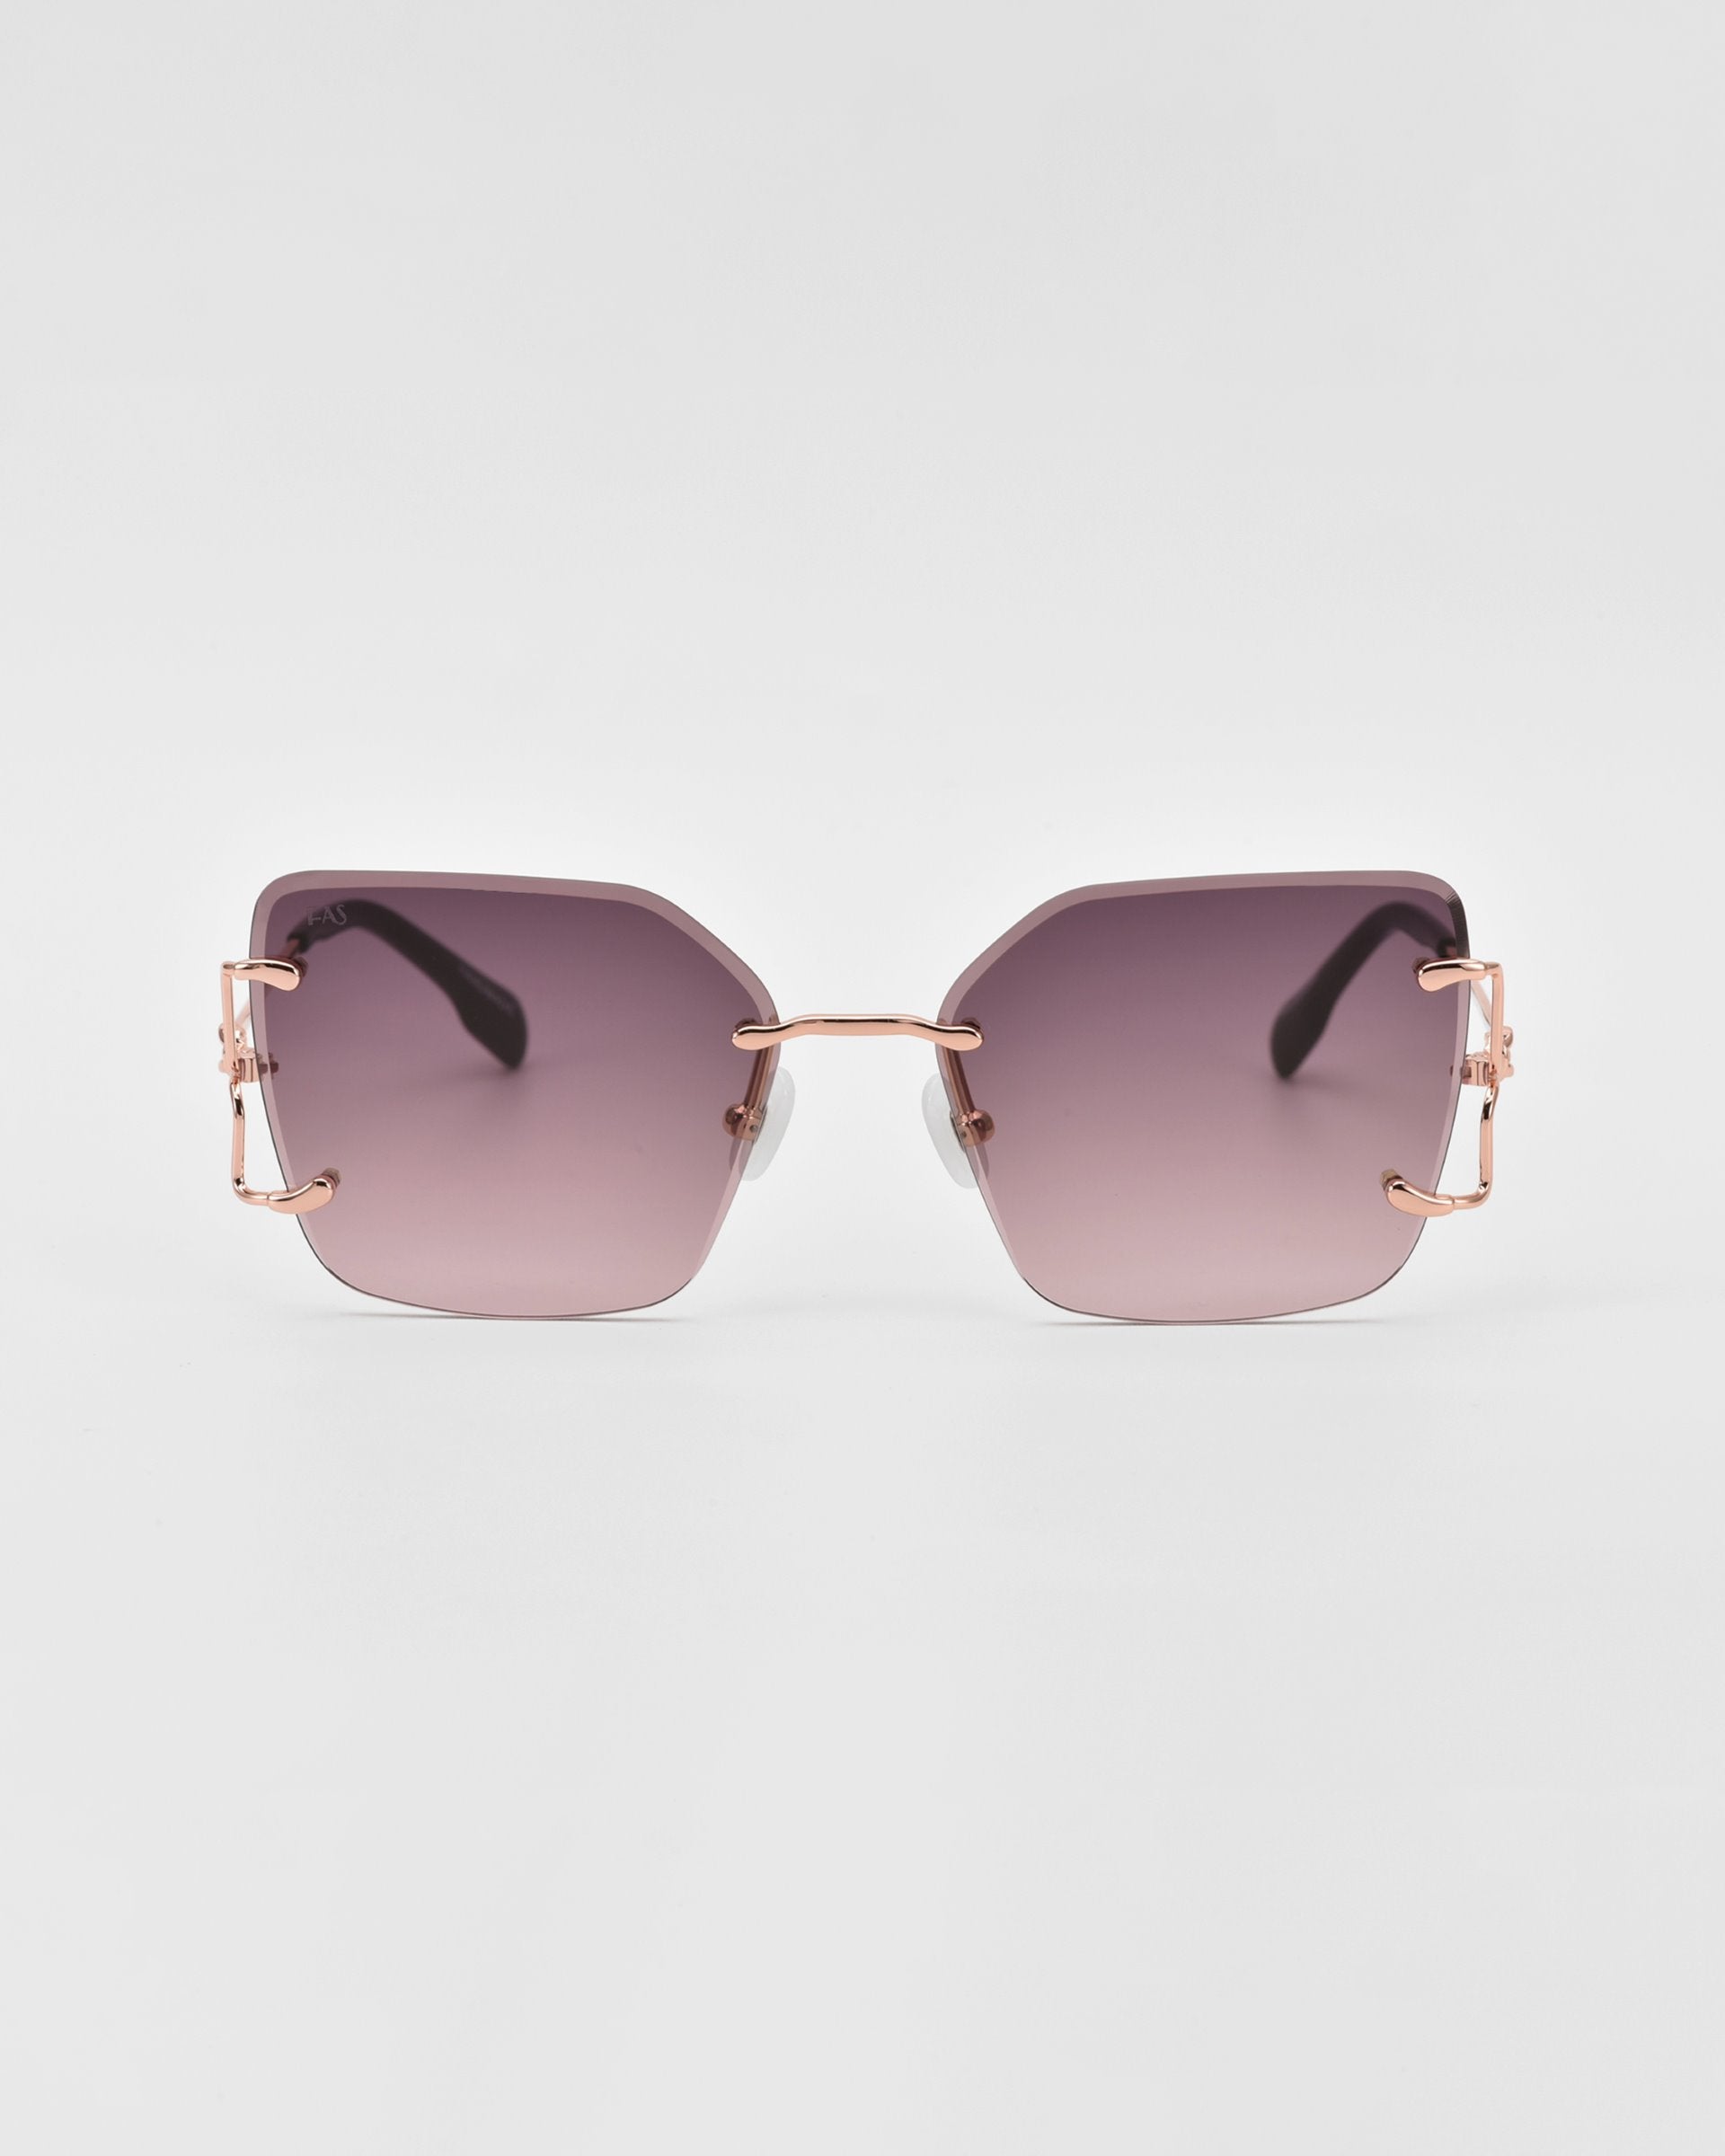 A pair of stylish For Art's Sake® sunglasses featuring rectangular purple-tinted lenses and rose gold frames. The design is sleek and modern with thin metal temples, adding a fashionable touch to the overall look. Enhanced with jade-stone nosepads for extra comfort, all set against a plain white background.